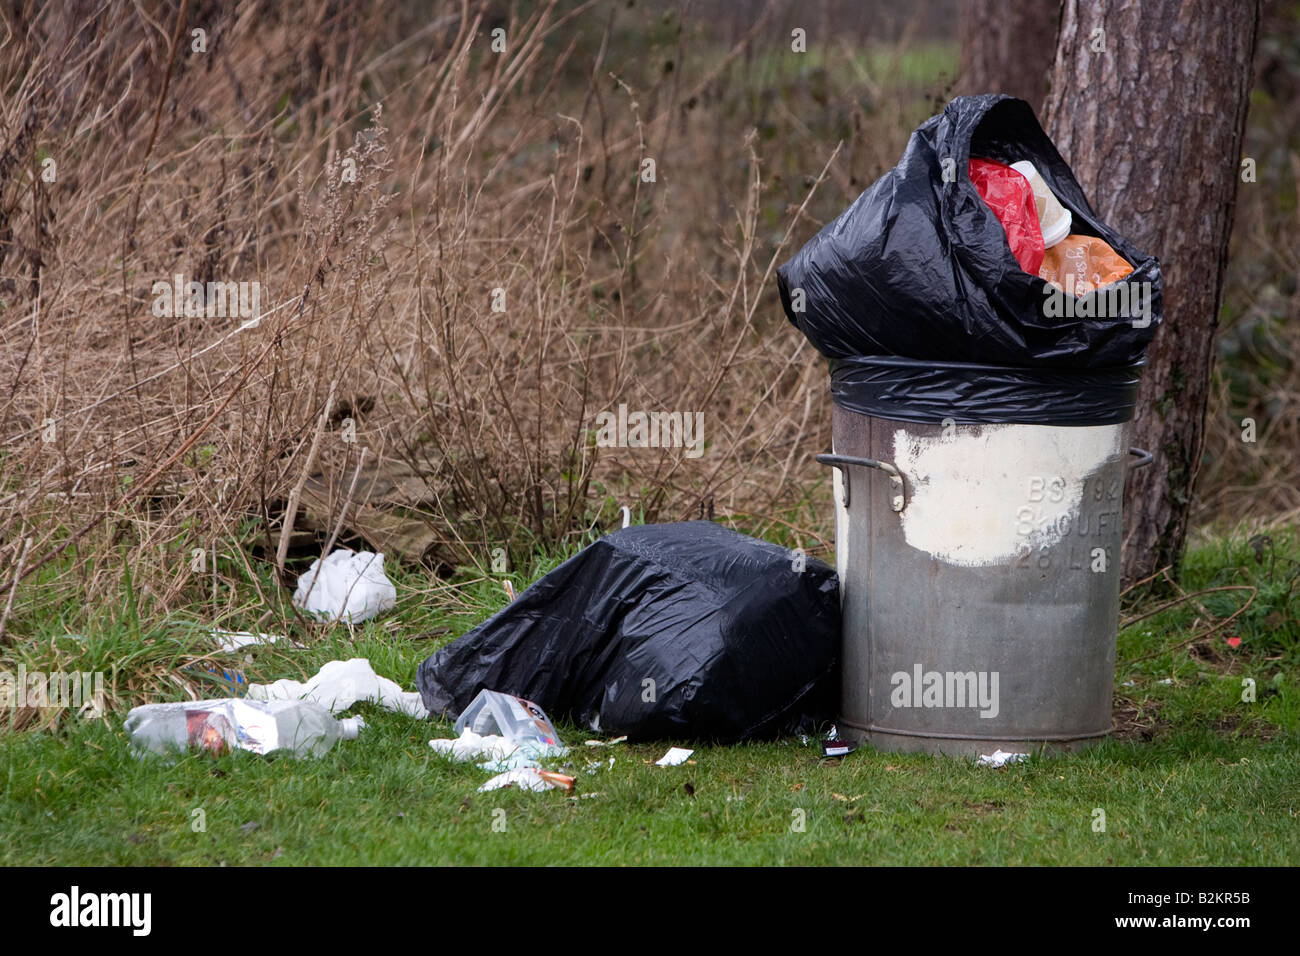 Rubbish piles up in a roadside Stock Photo